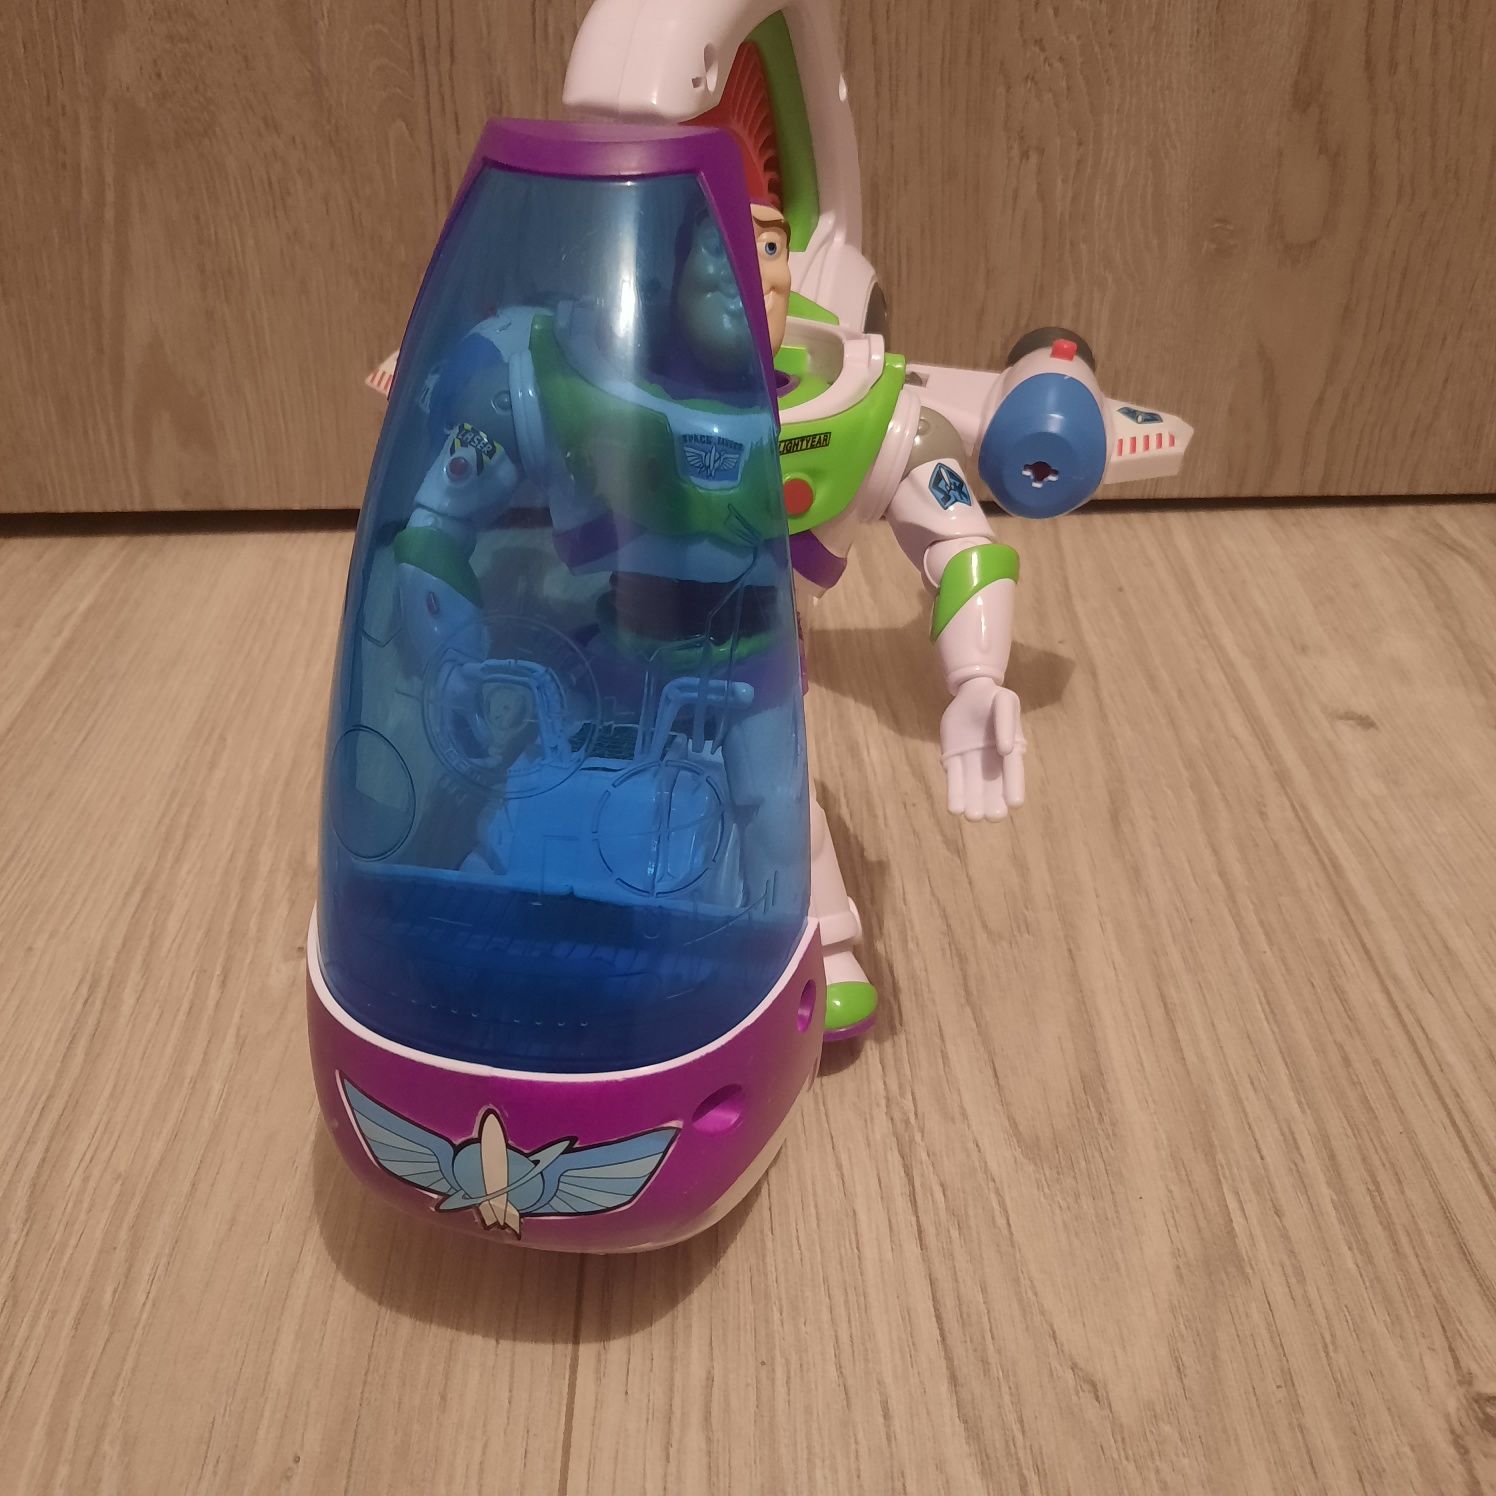 Toy story buzz astral